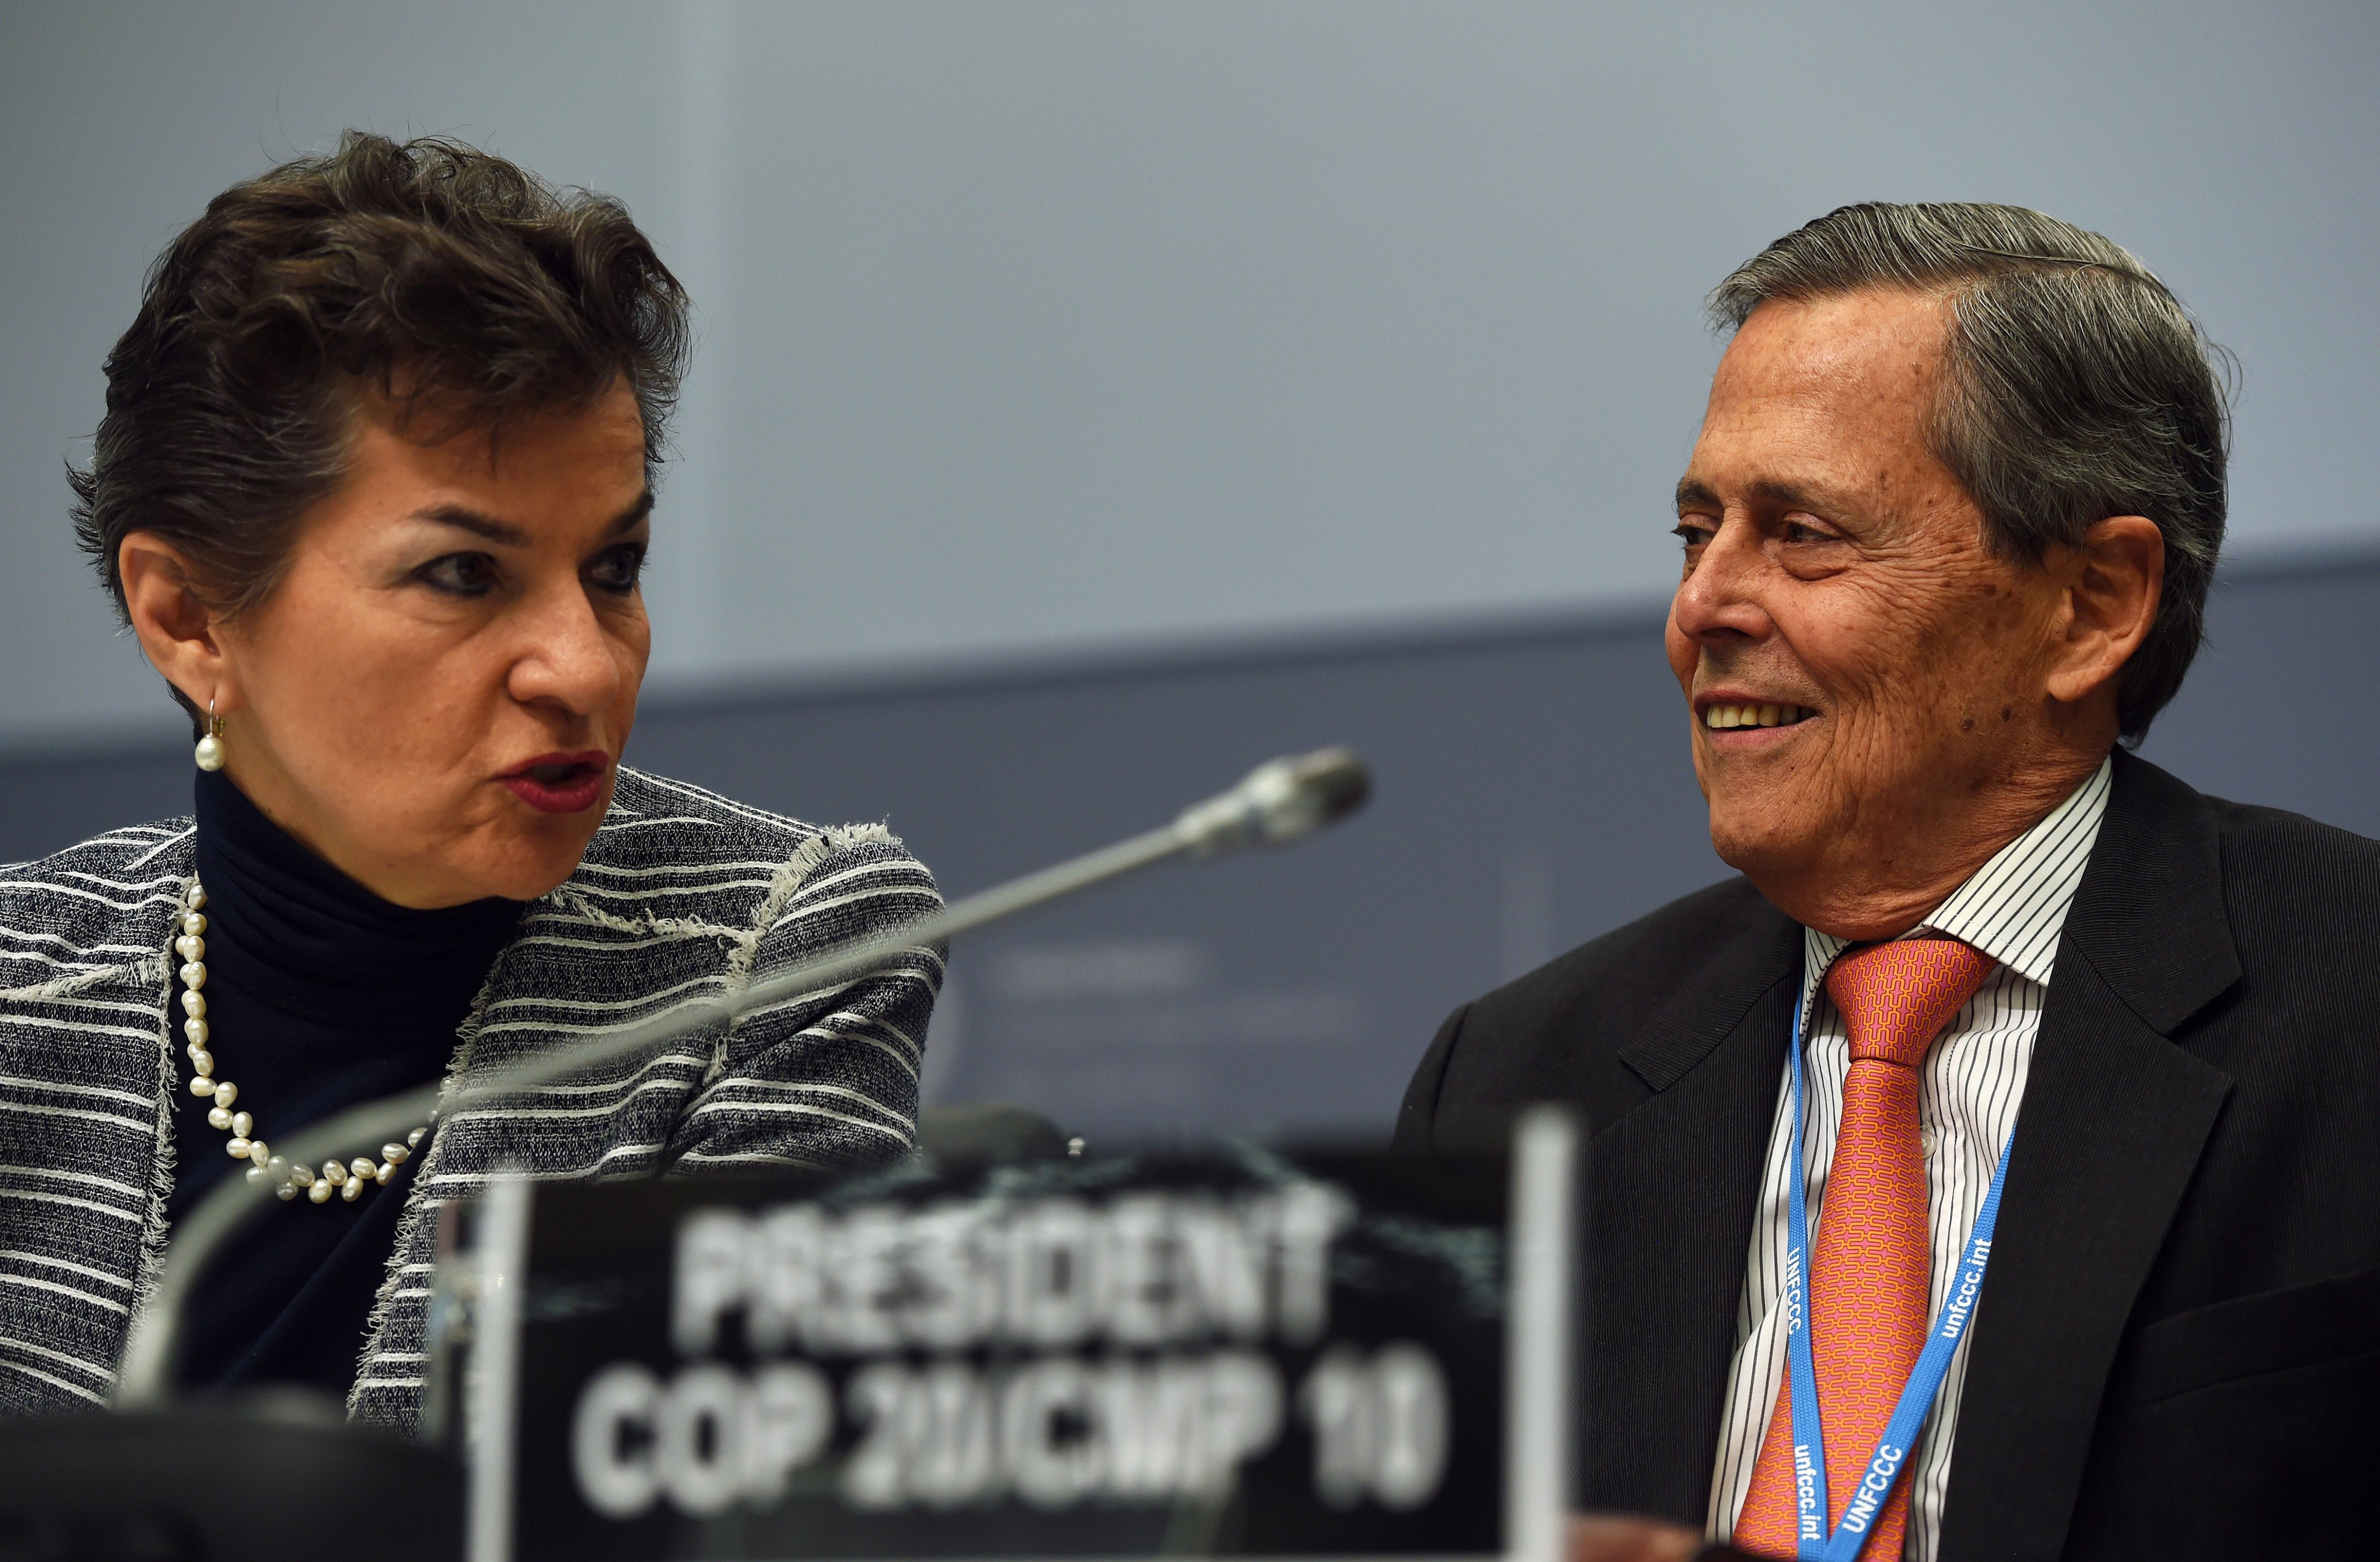 Special Representative of Peru for Climate Change, Jorge Voto Bernales (right), and Executive Secretary of the United Nations Framework Convention on Climate Change (UNFCCC), Christiana Figueres, during the UNFCCC opening ceremony in Bonn, Germany, on June 1, 2015. (Patrik Stollarz—AFP/Getty Images)